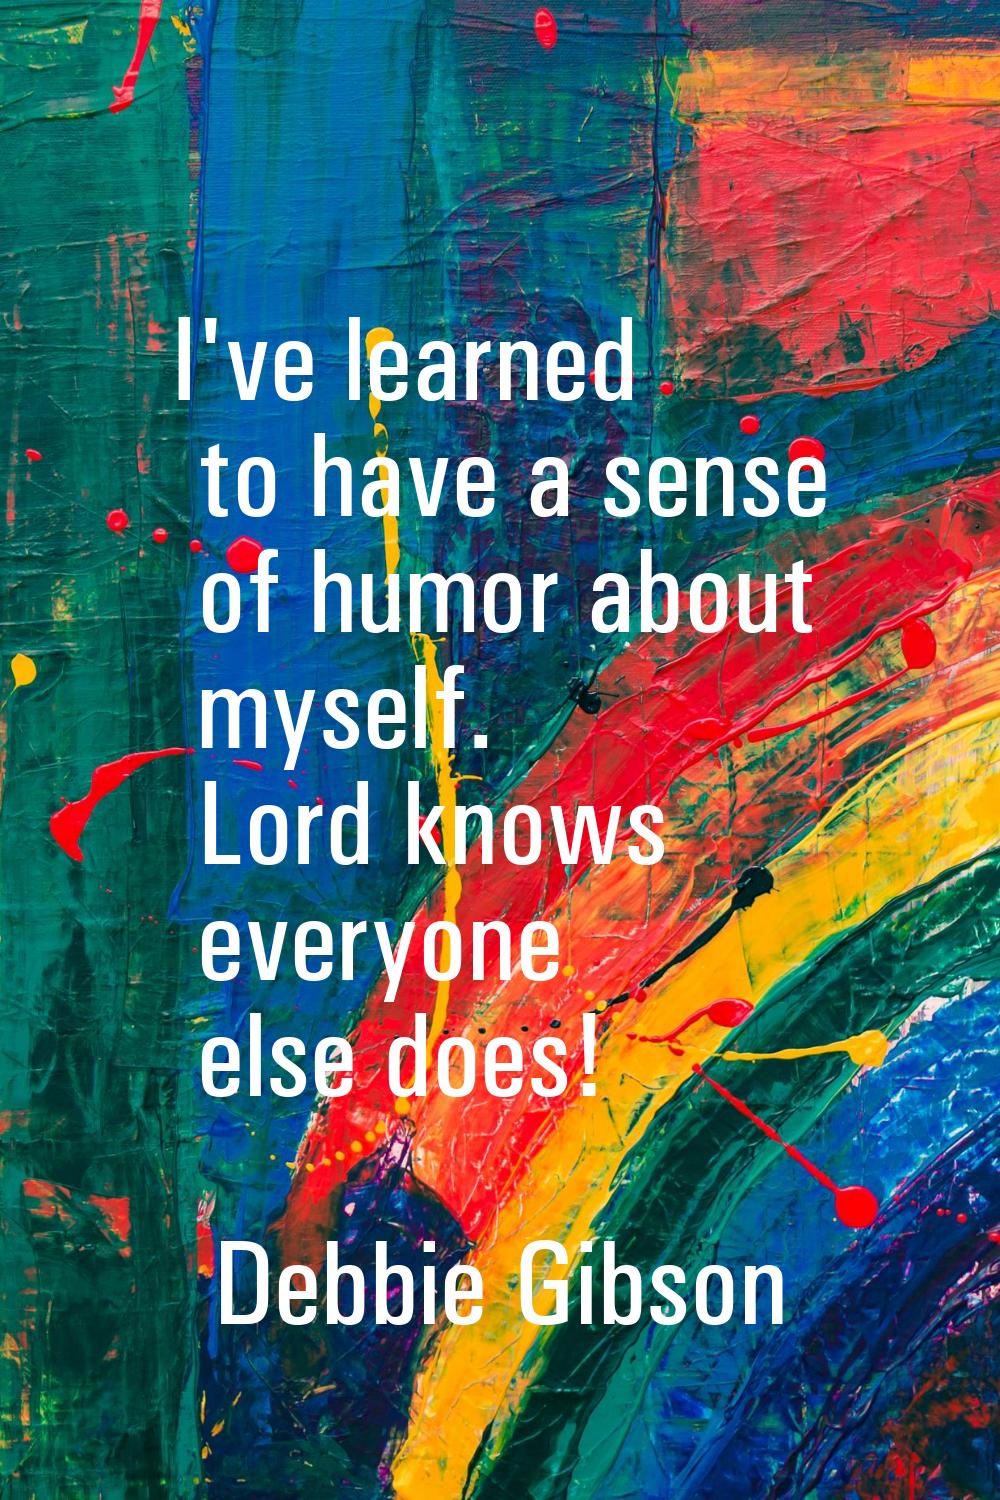 I've learned to have a sense of humor about myself. Lord knows everyone else does!